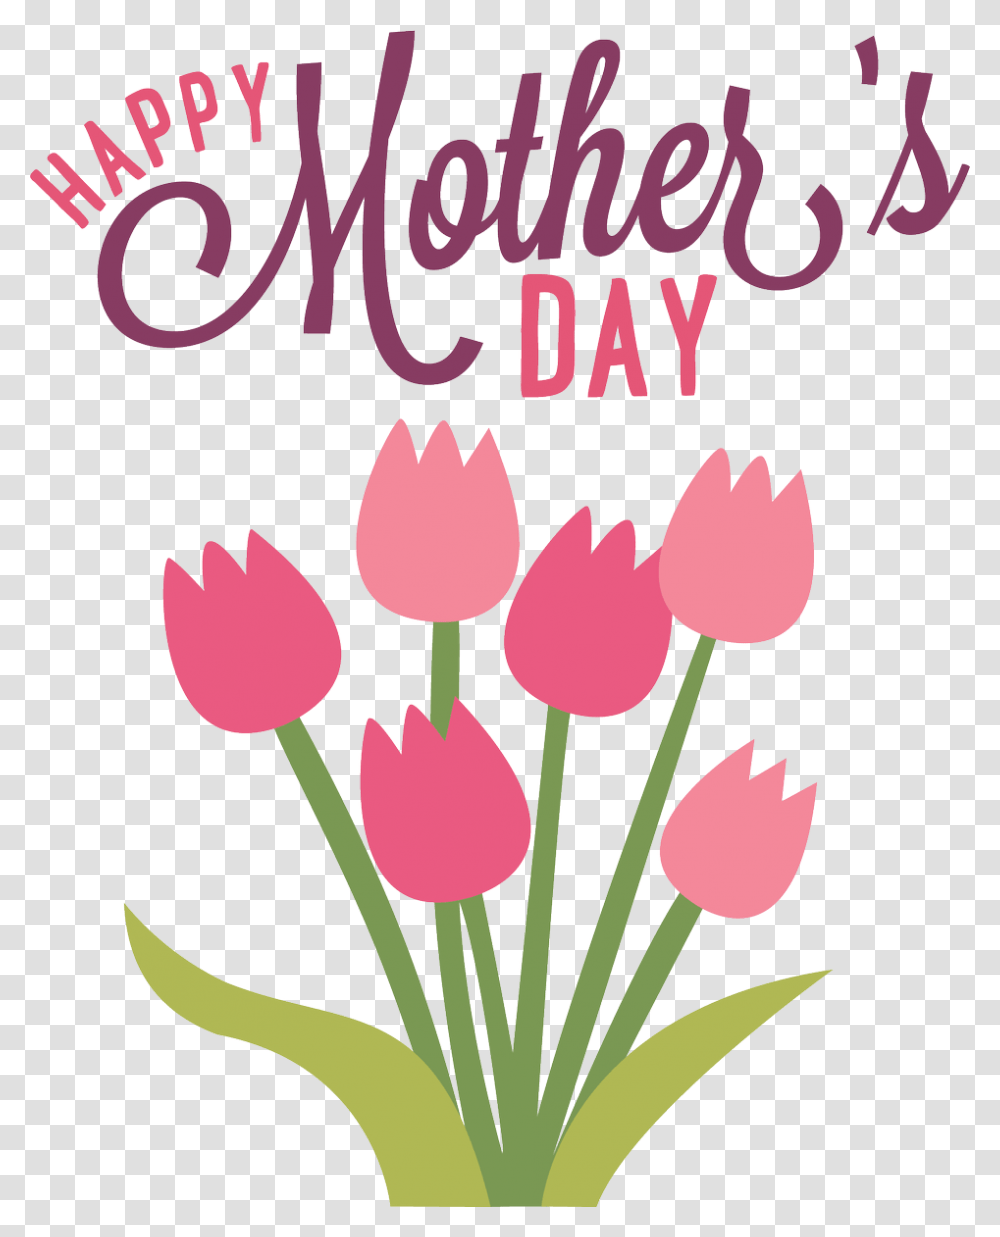 Gnydm On Twitter Wishing All The Mothers A Very Happy, Plant, Flower, Blossom, Tulip Transparent Png